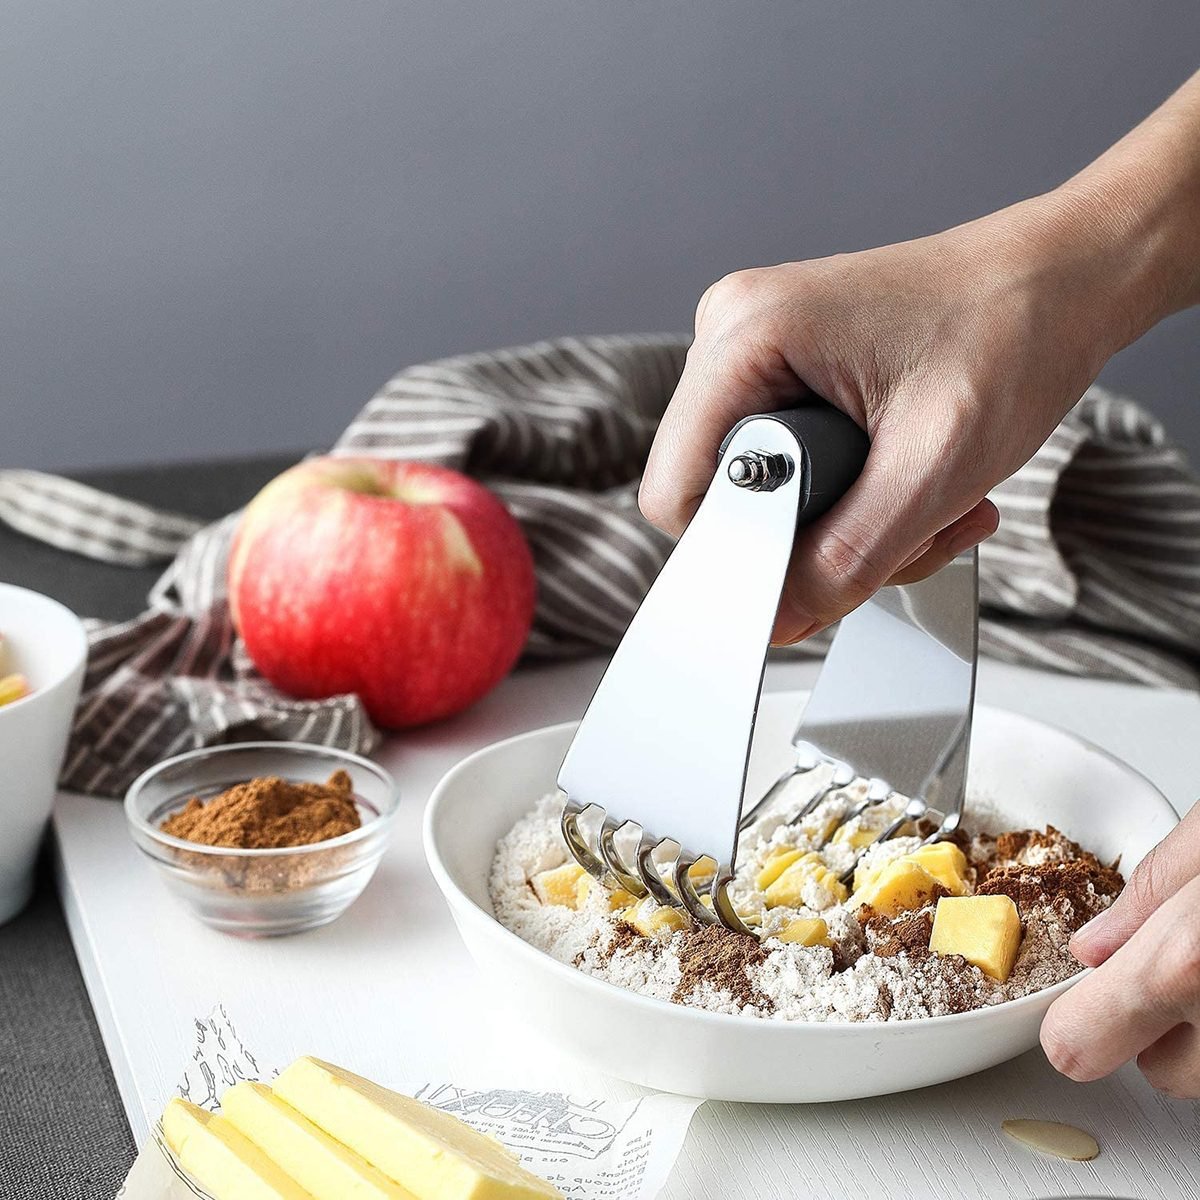 The 13 Best Kitchen Utensils: Wooden, Silicone and More